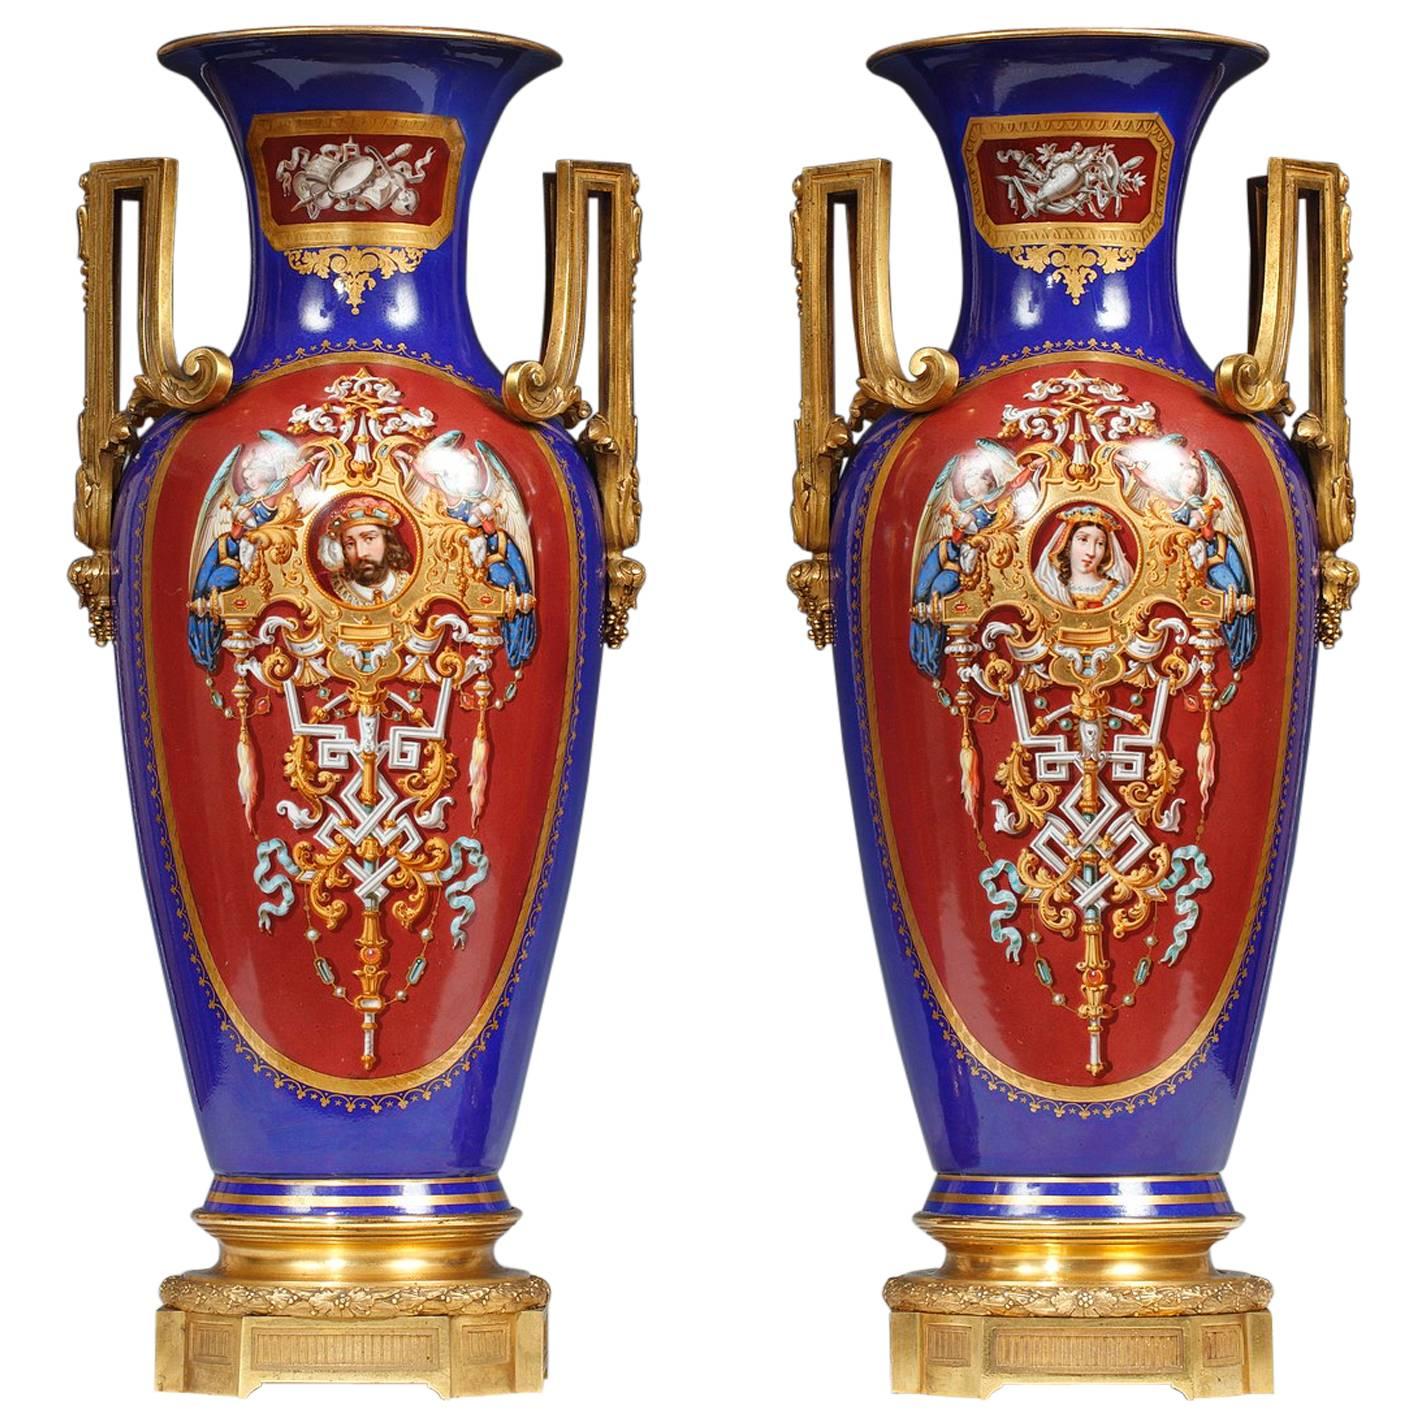 Pair of Ormolu Porcelain Vases by the Royal Porcelain Manufacture of Berlin For Sale